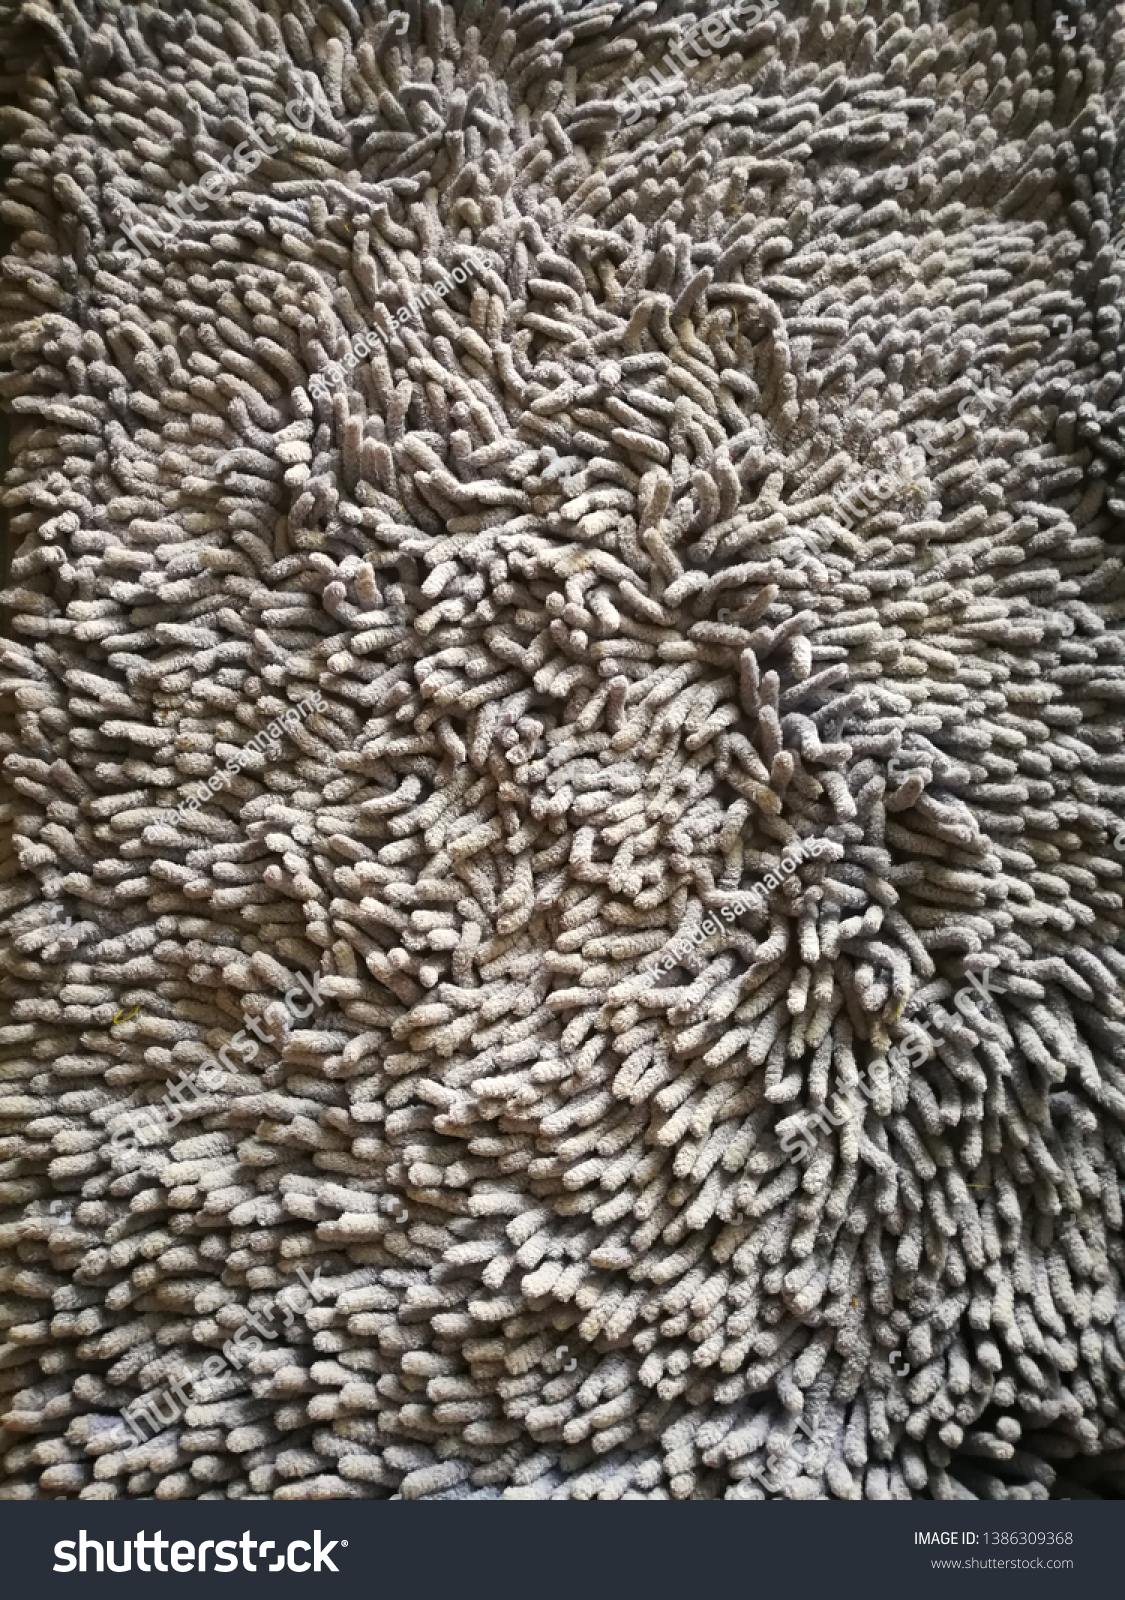 Carpet that has not been cleaned #1386309368